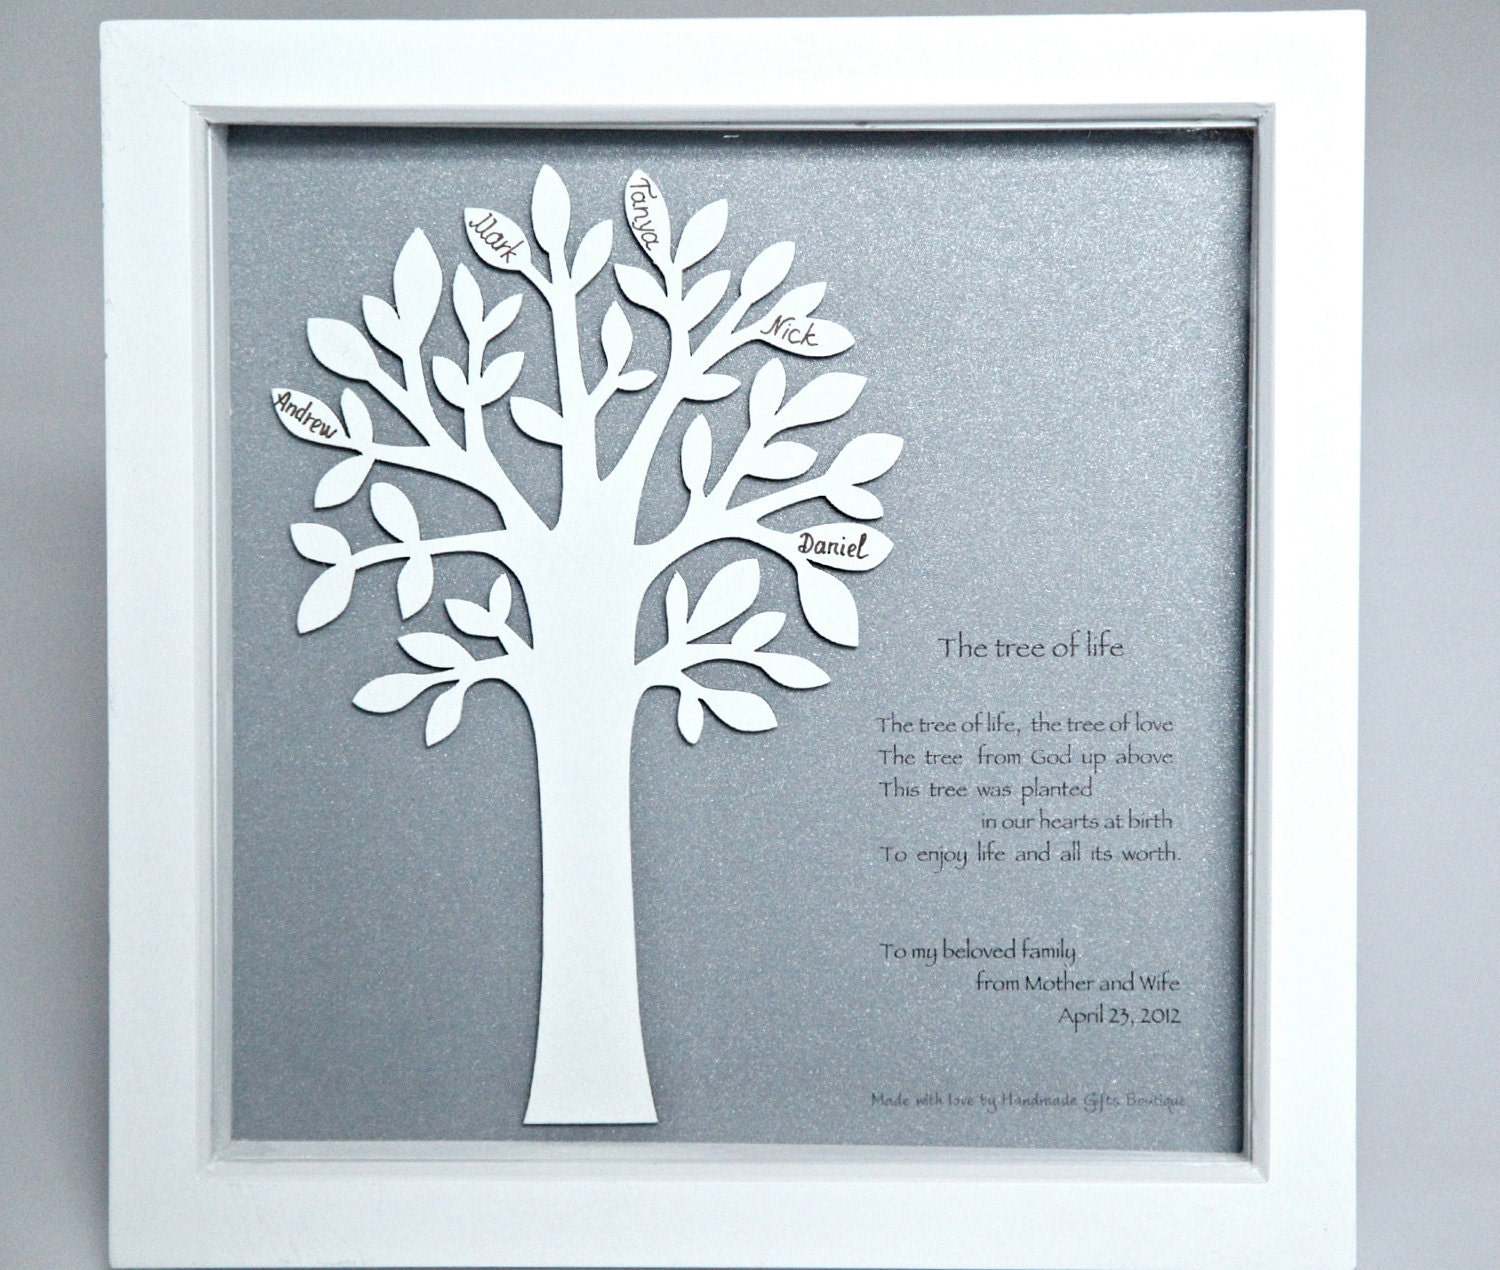 A Personalised, 3D wooden Family Tree in a box frame, Gift for Wedding, Anniversary, New Born, Christening, Keepsake, Mothers/ Fathers Day